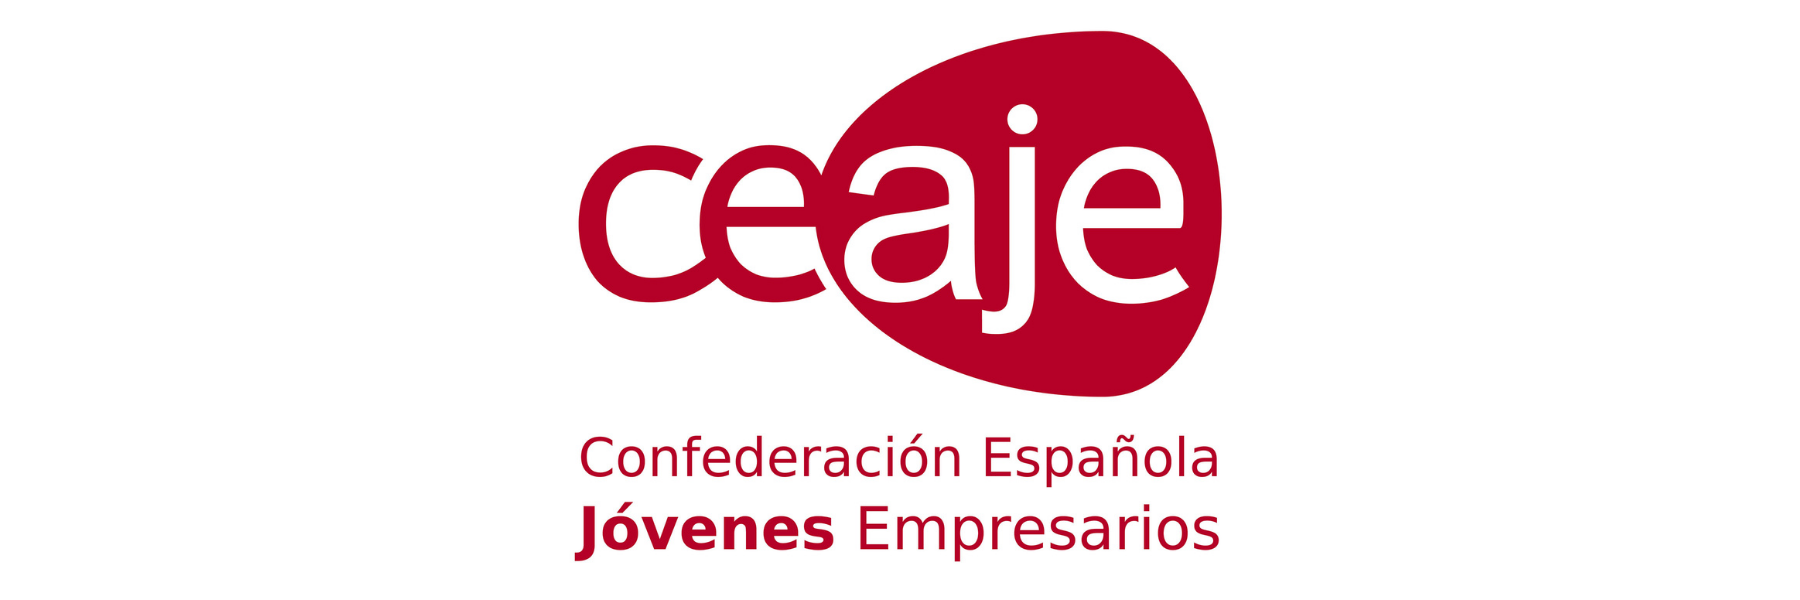 canva-ceaje.png